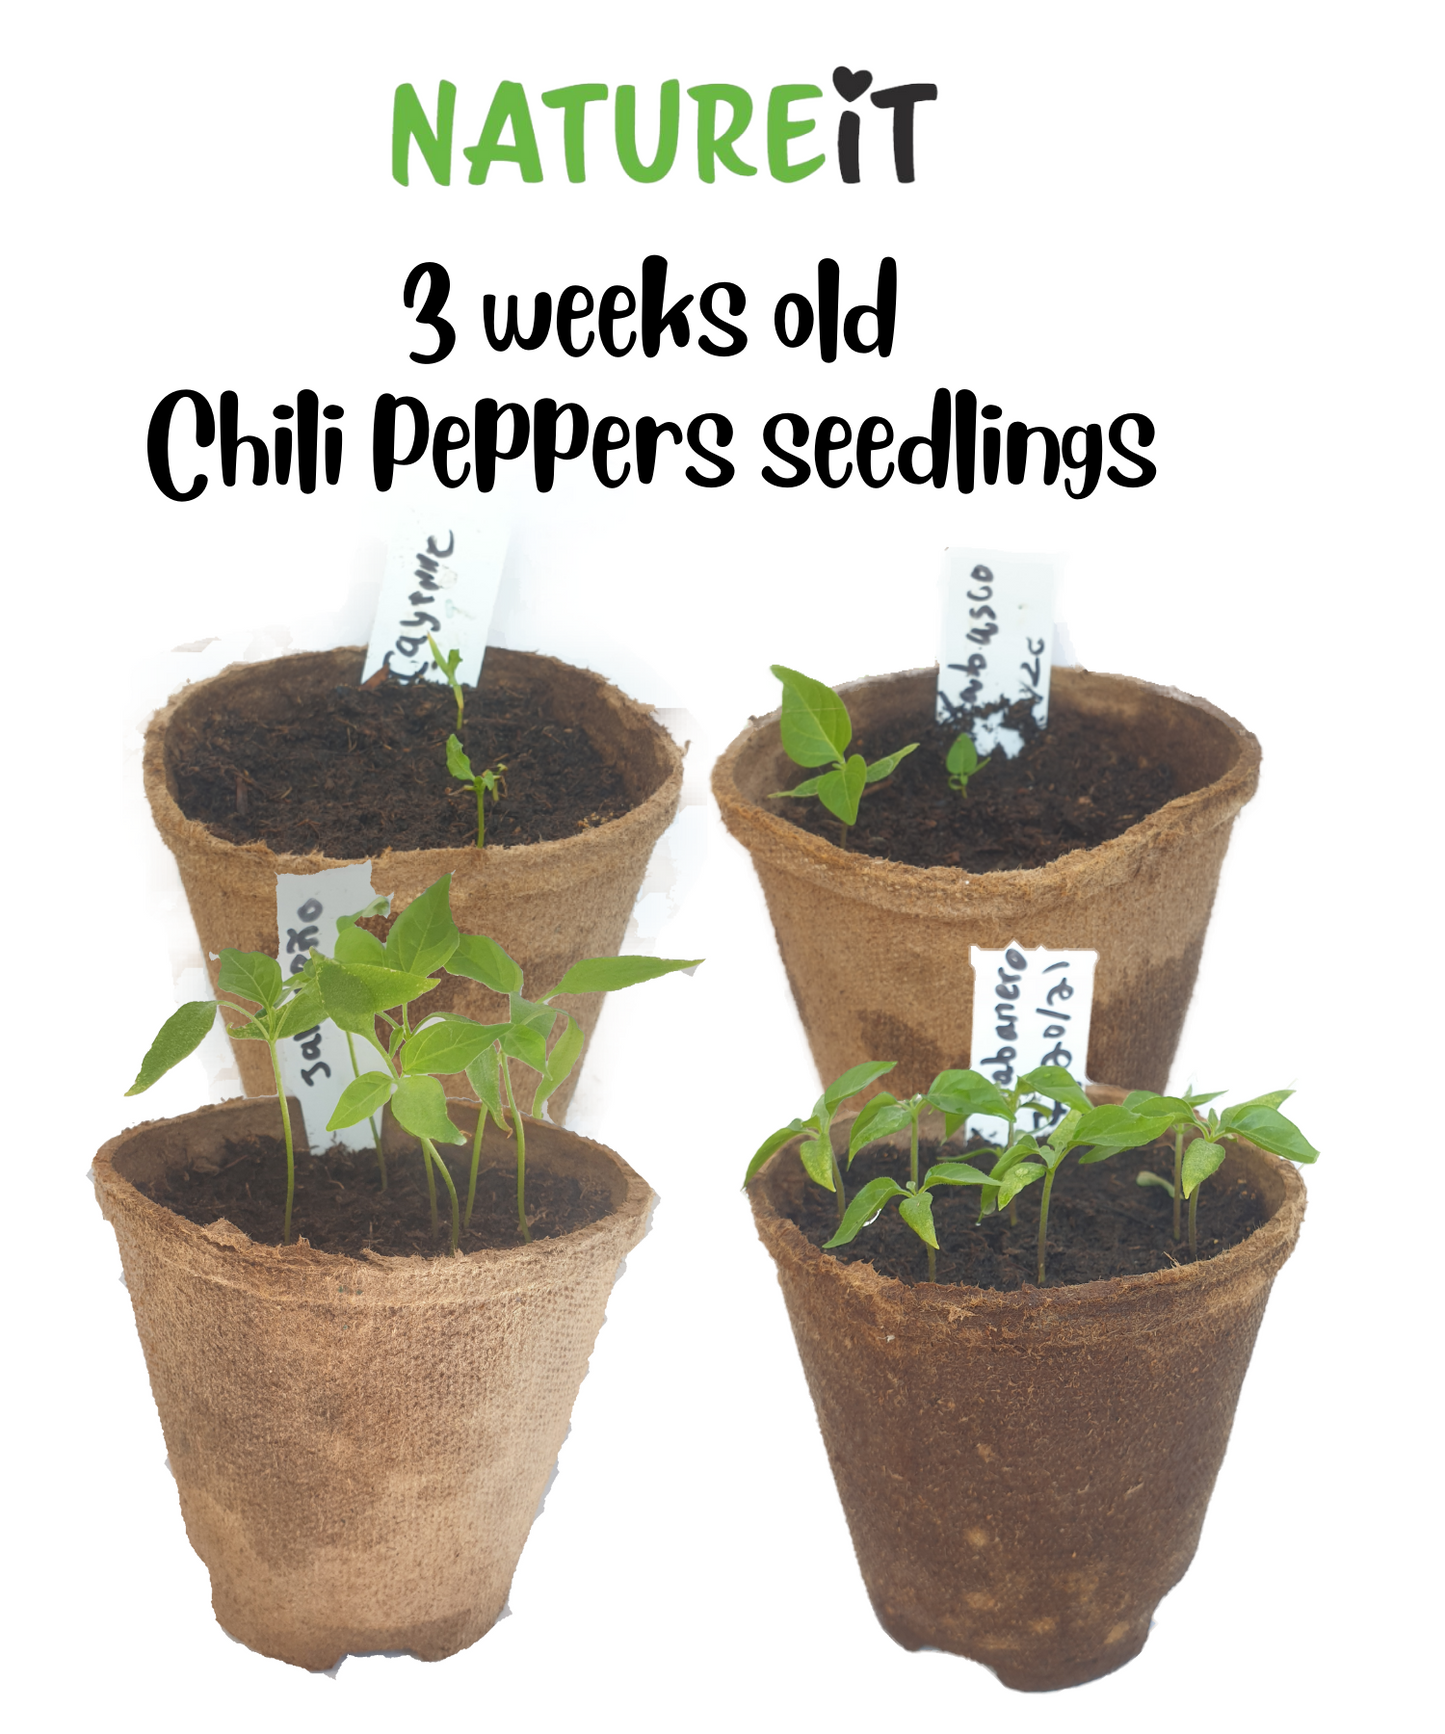 3 weeks old Chili pepper plants seedlings grown from seed using Natureit hot chili peppers seed starter kit